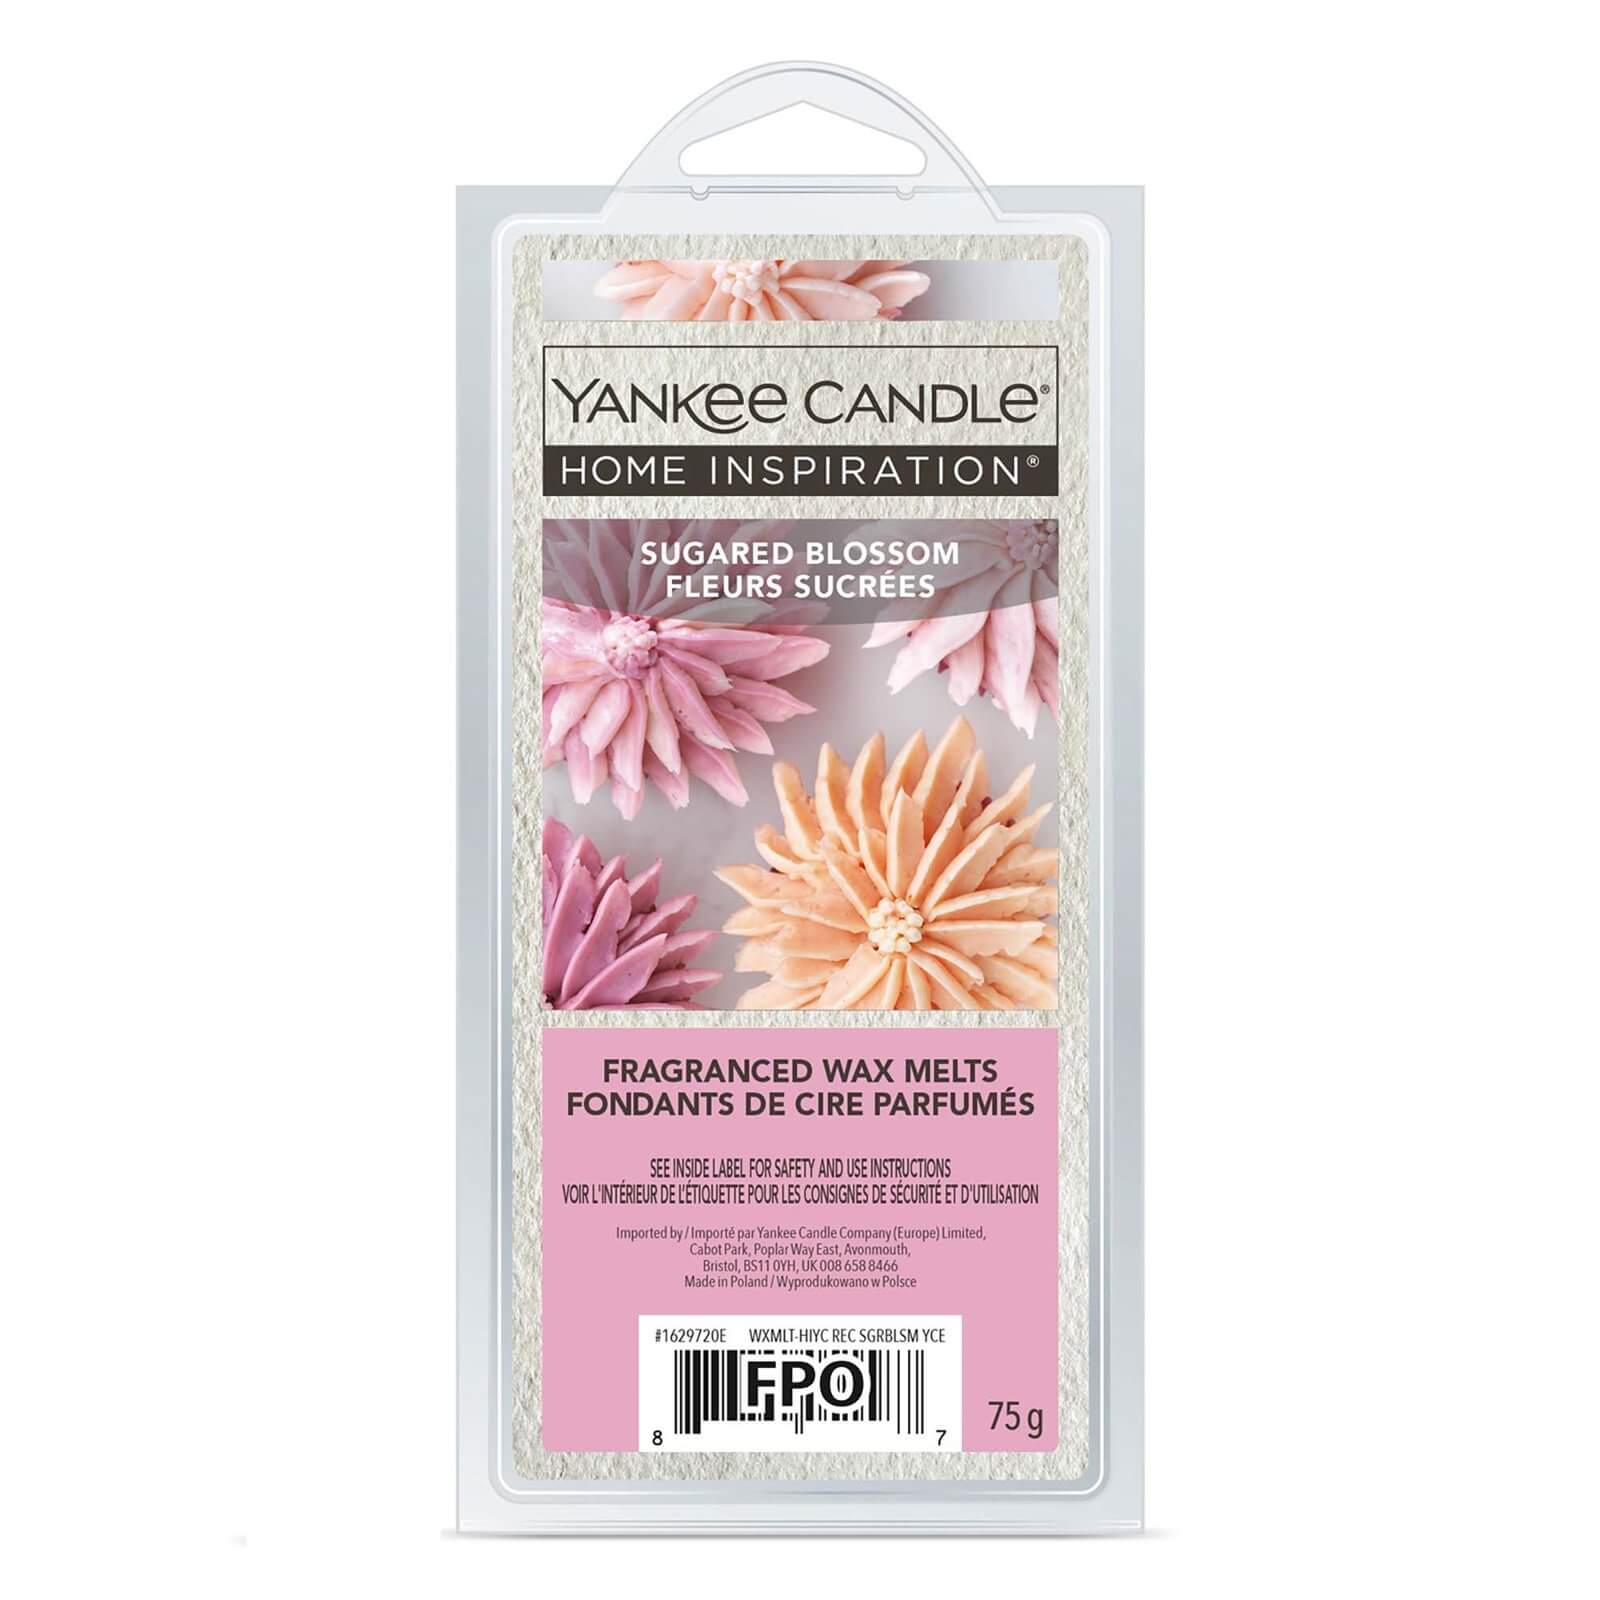 Yankee Candle Home Inspiration Wax Melt - Sugared Blossom